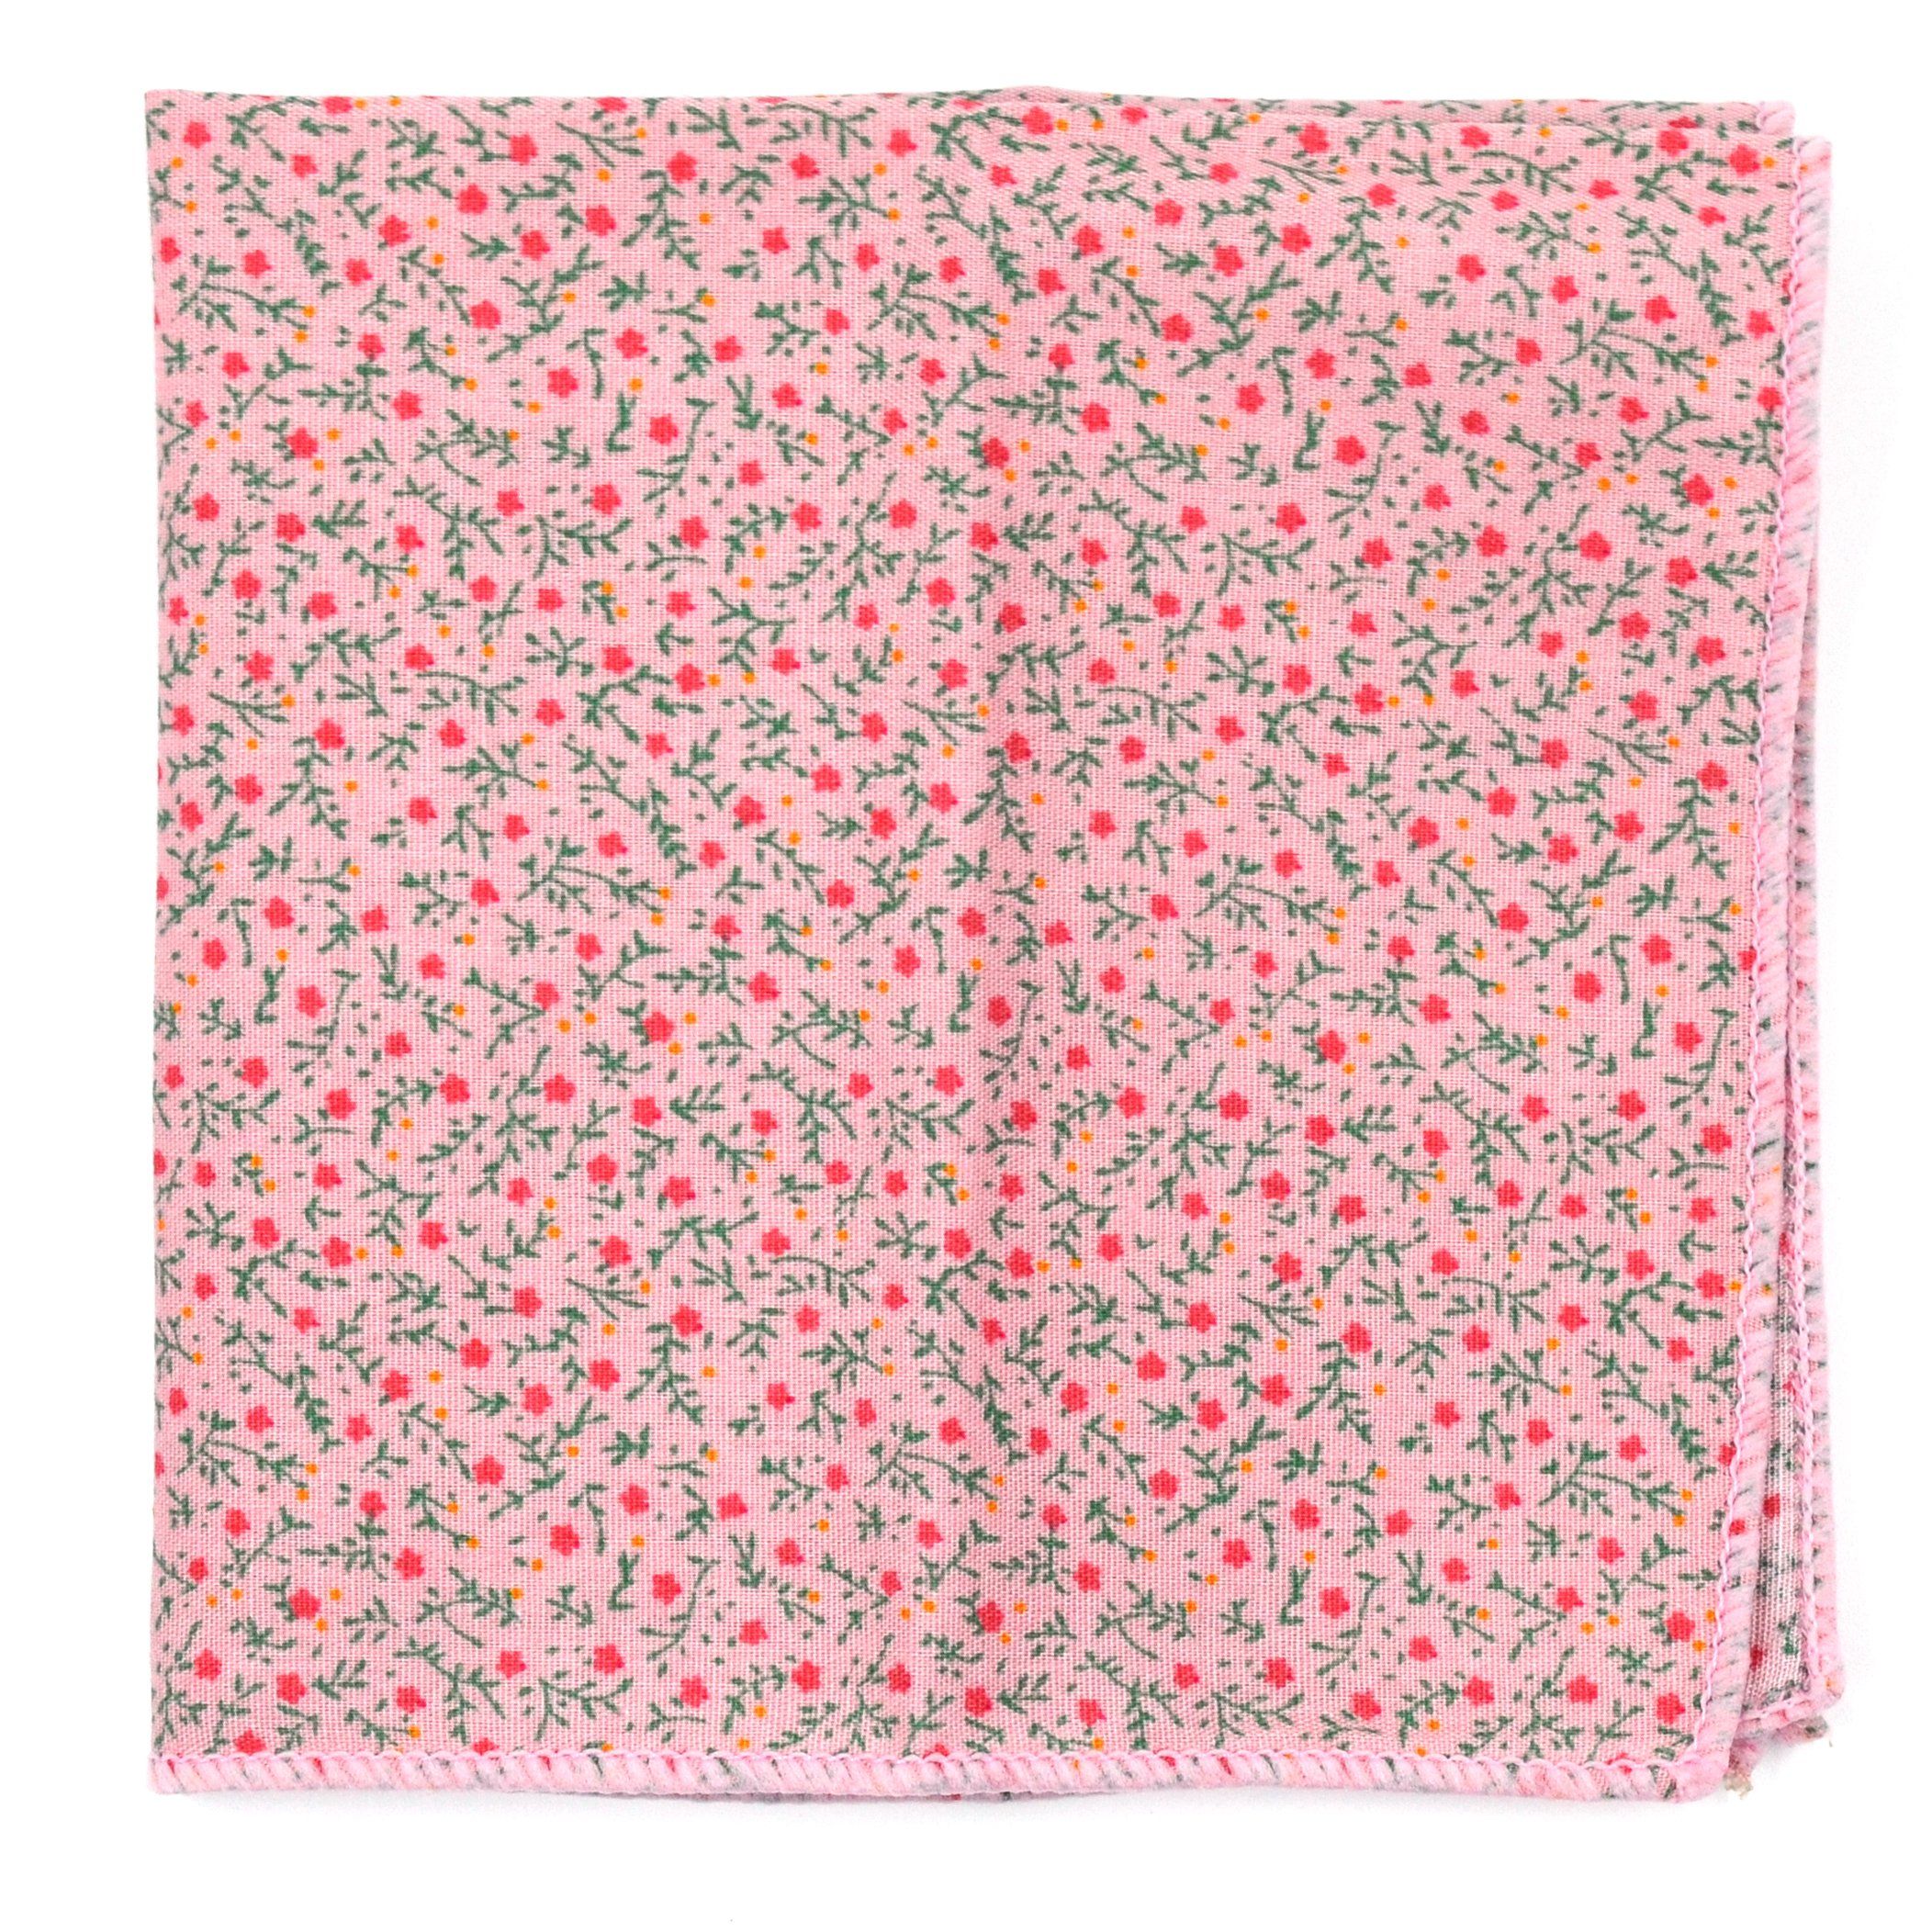 Floral Strawberry Field Pocket Square - Art of The Gentleman